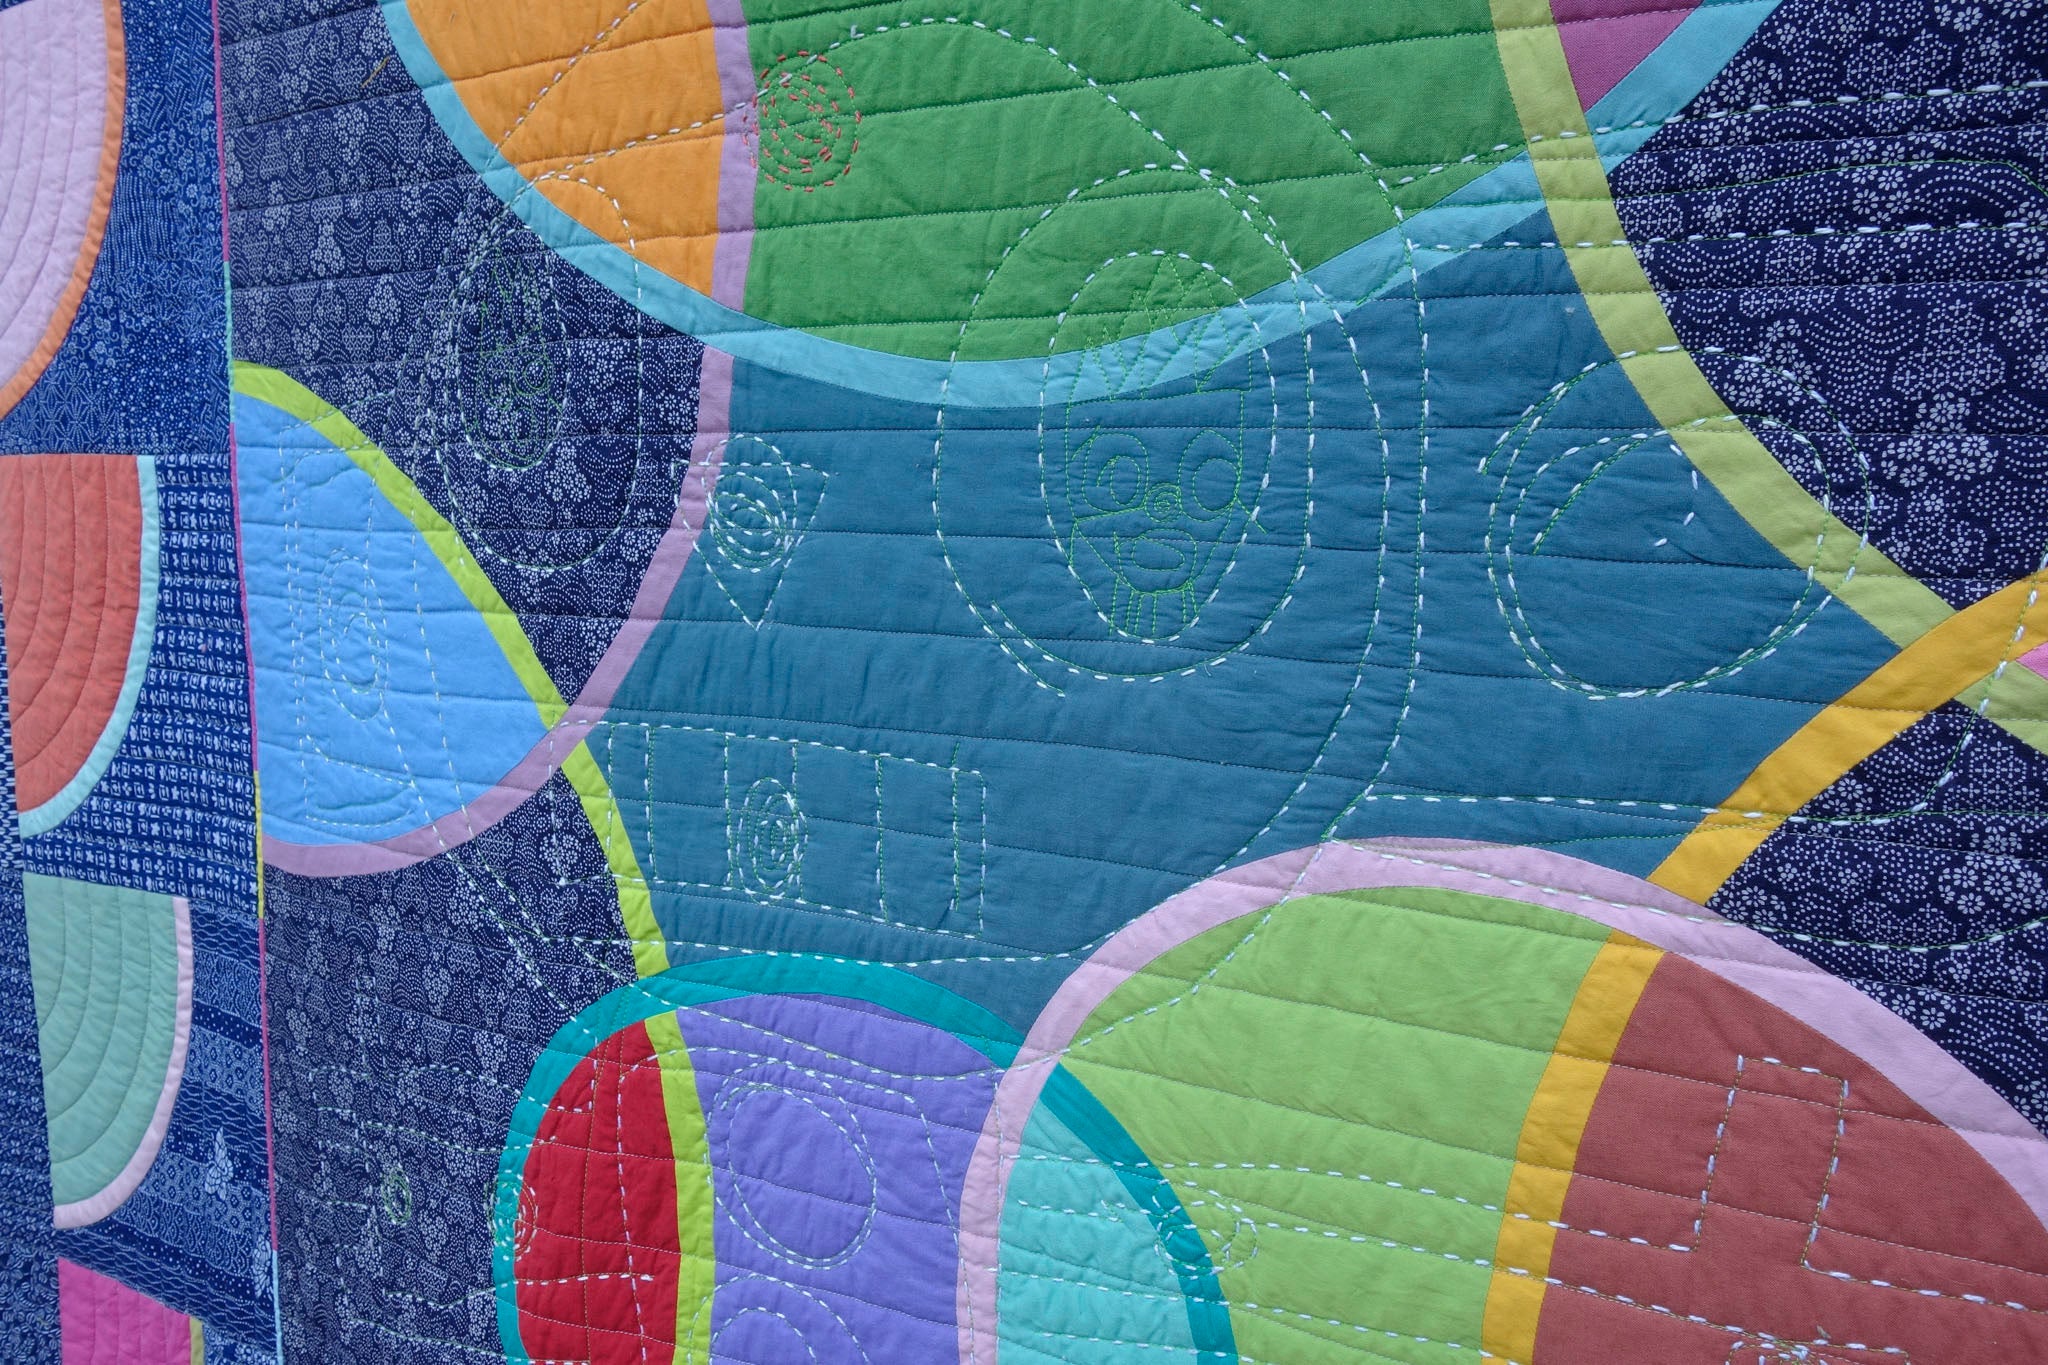 Watermelon From Mars, detail, a quilt by Patricia Belyea